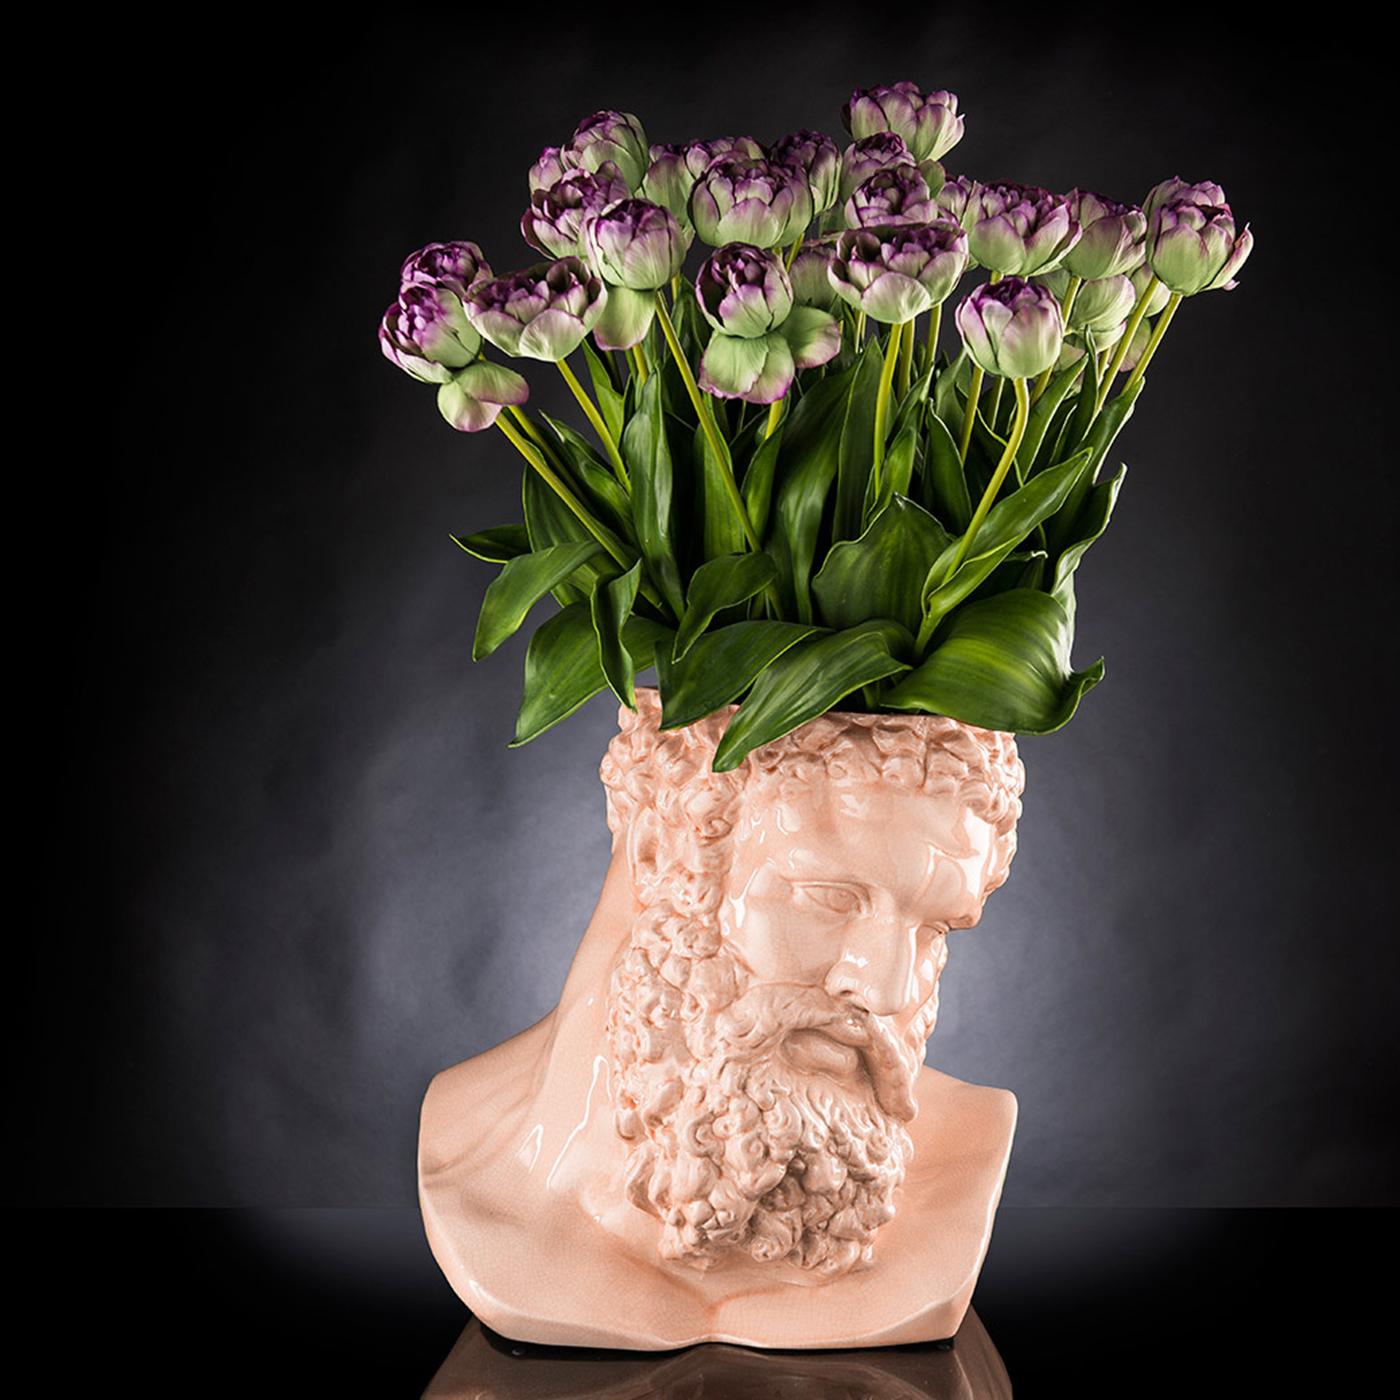 Classical Italian art meets modern styling and artisanal flair with the Hercules Cantaloupe Vase. Depicting the famous hero from ancient Greek mythology, this decorative piece is beautifully crafted from ceramic with a stunning orange finish.